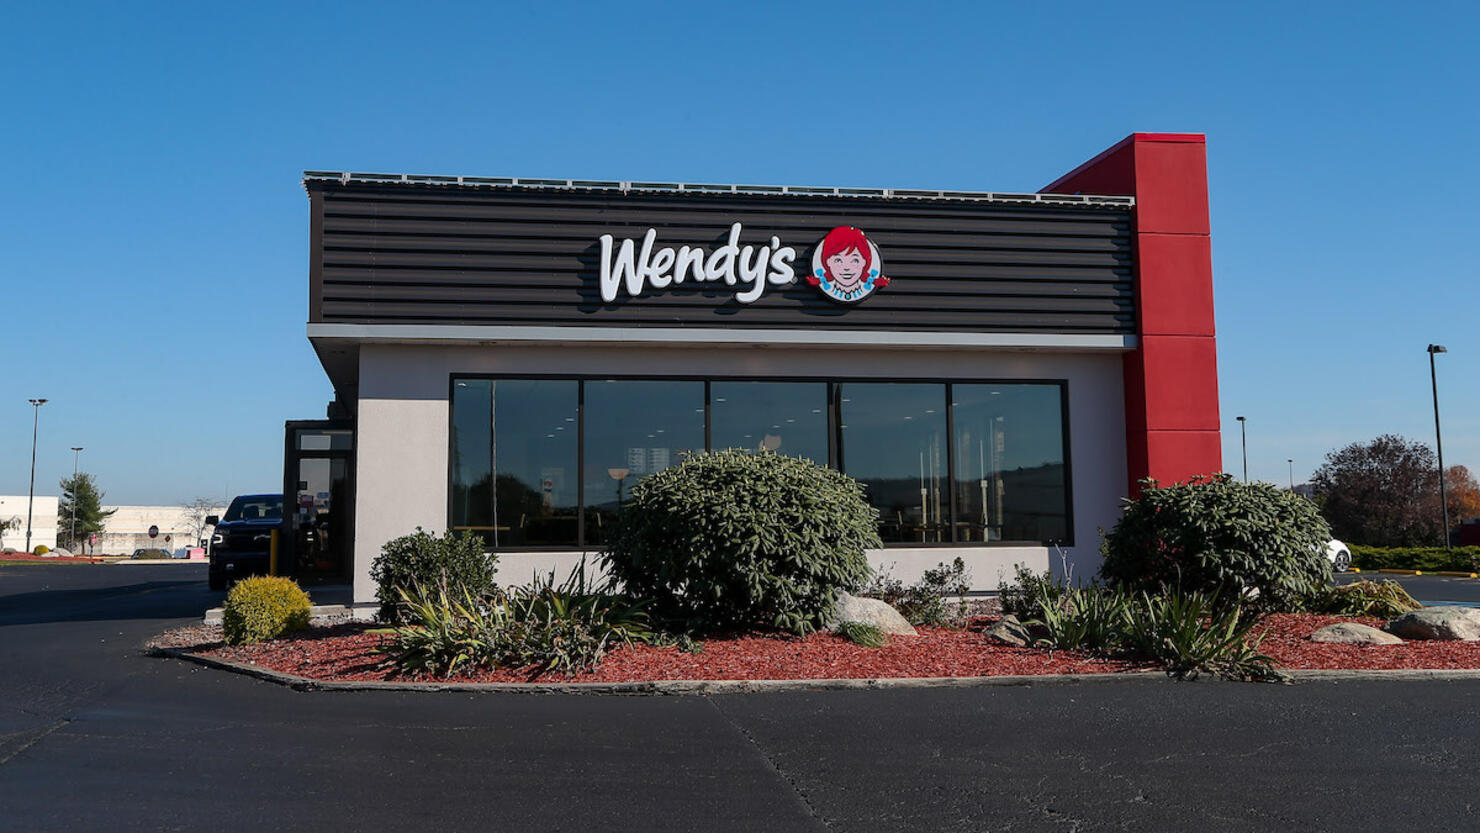 A recently renovated Wendy's restaurant is seen in